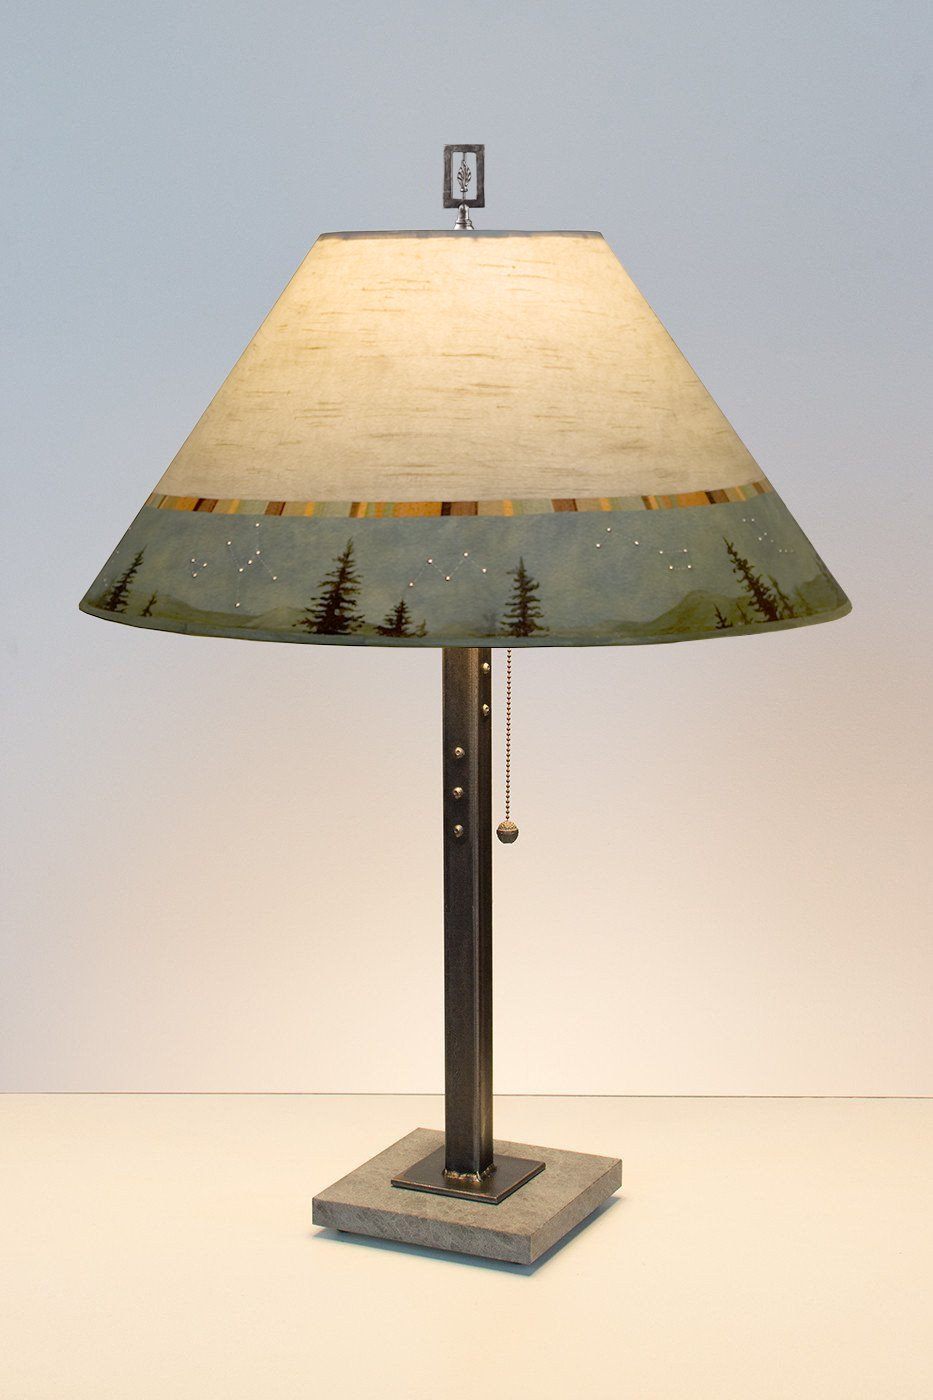 Janna Ugone &amp; Co Table Lamps Steel Table Lamp with Large Conical Shade in Birch Midnight